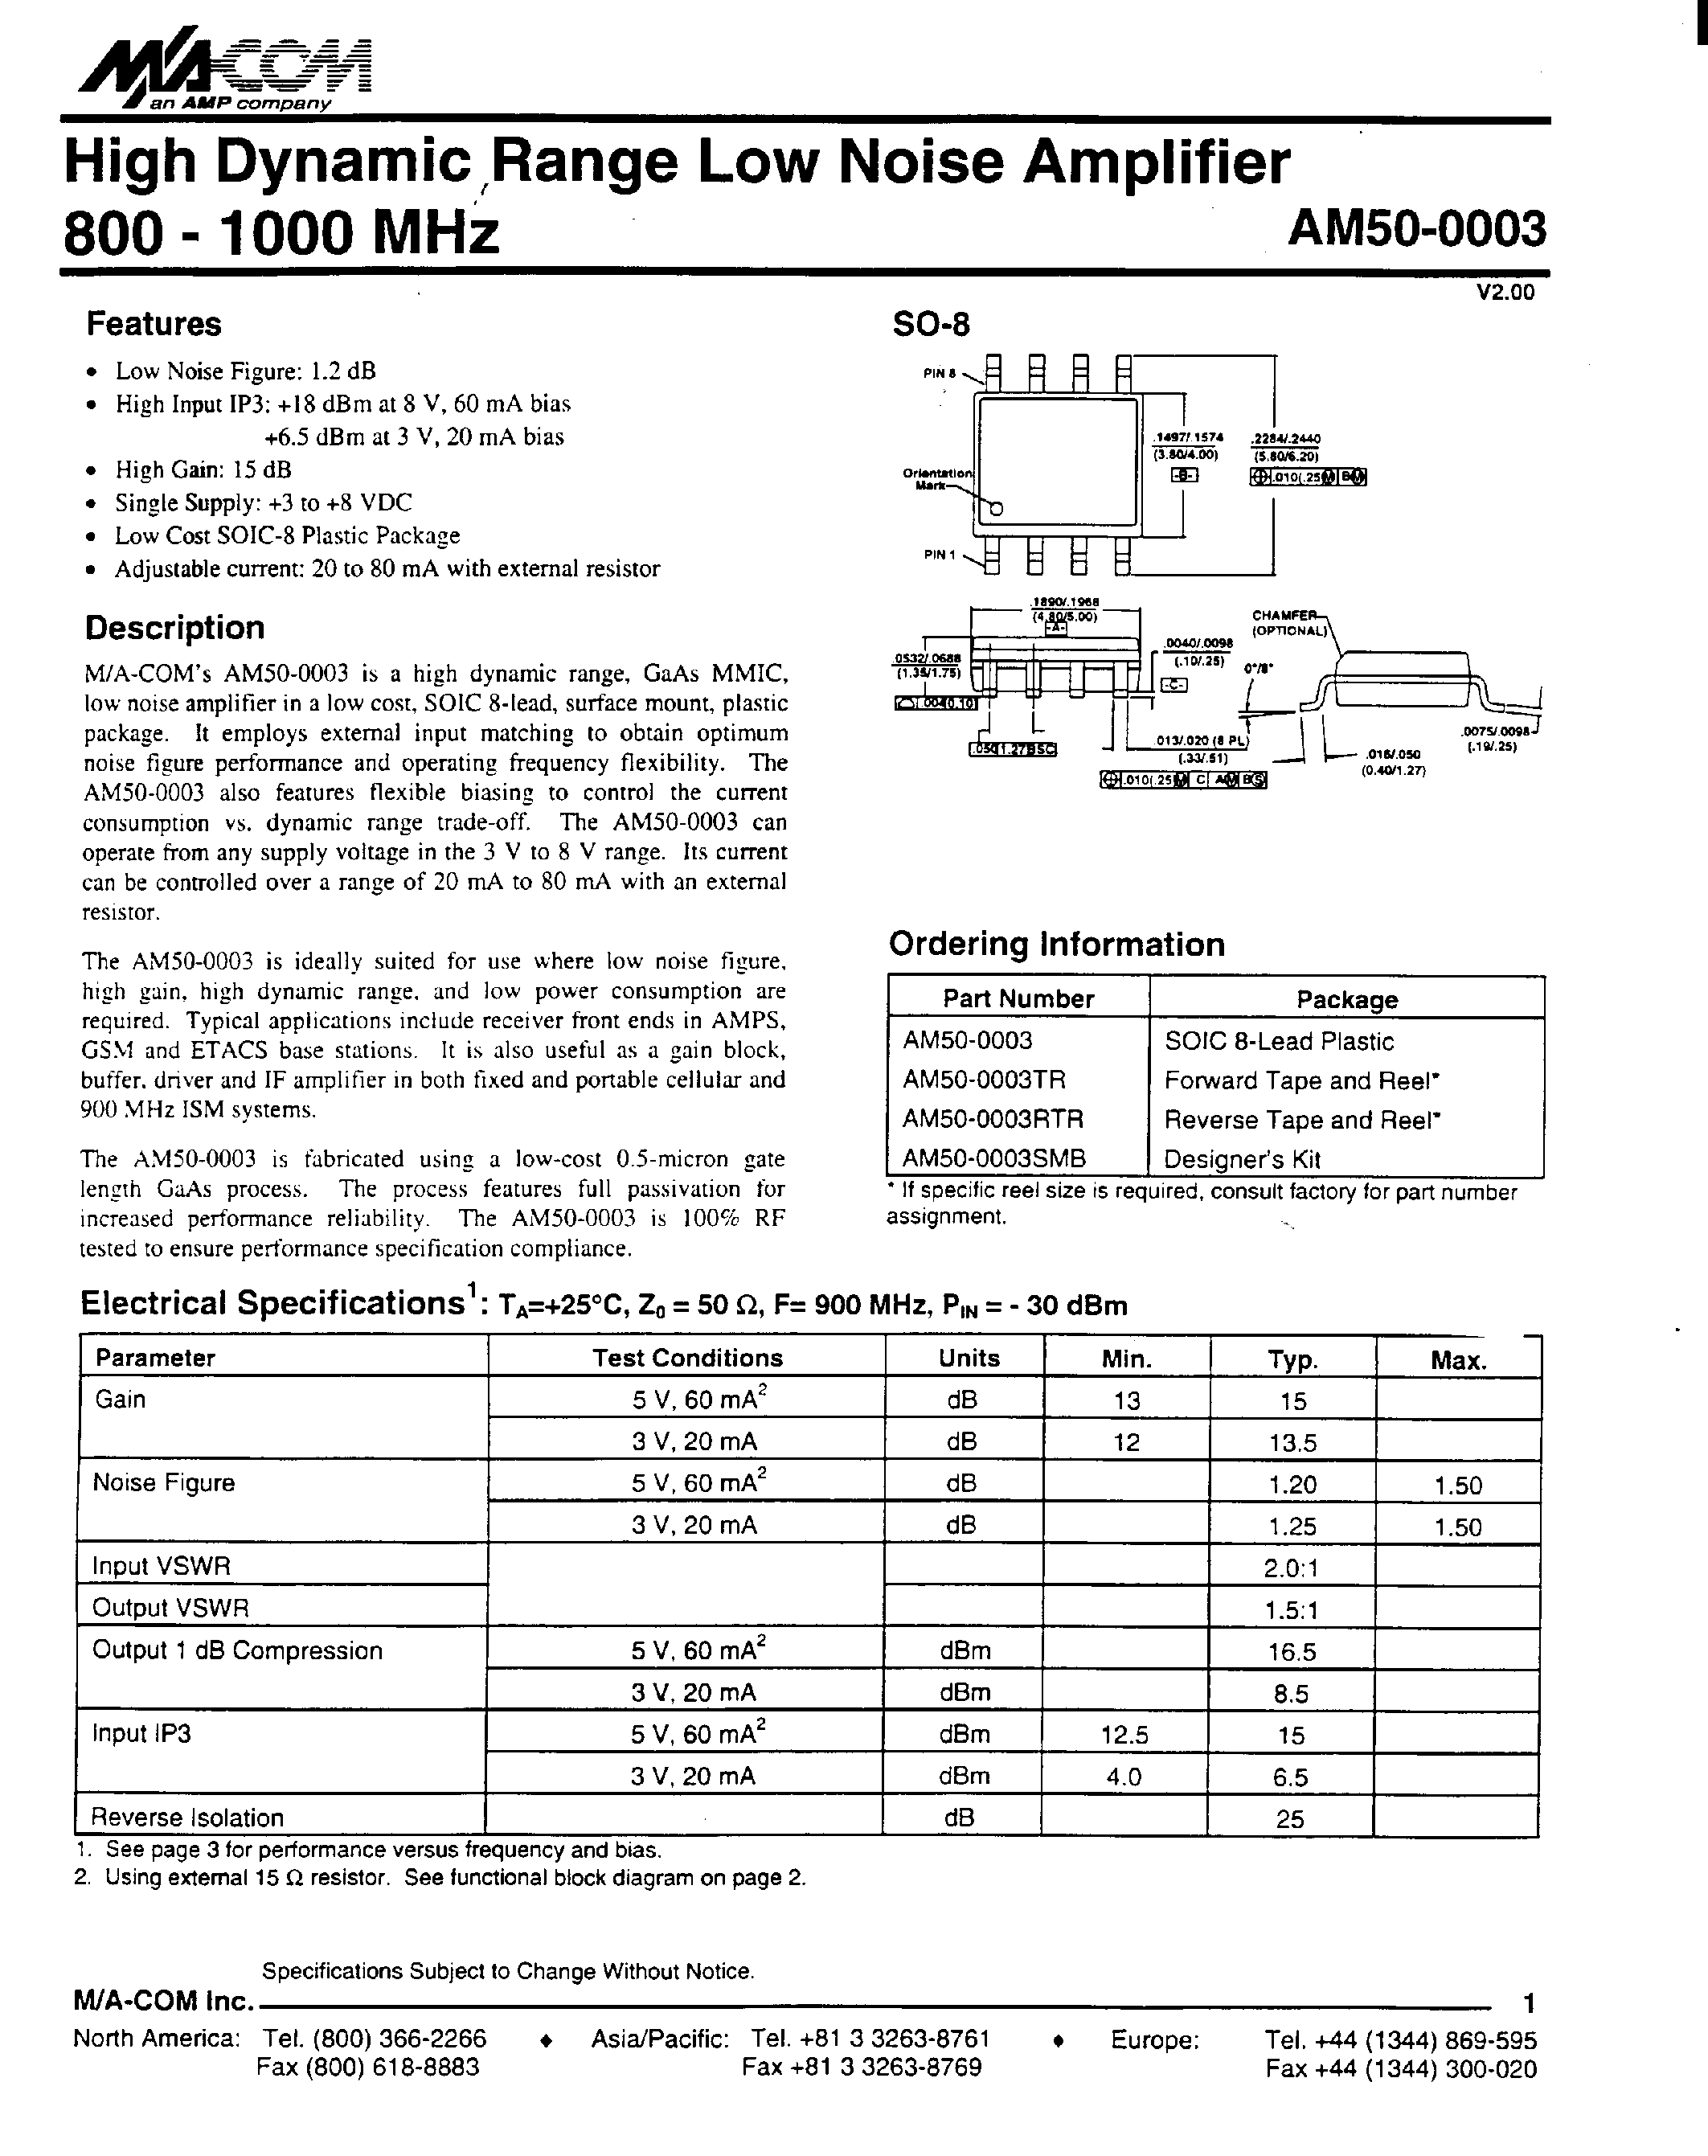 Datasheet AM50-0003TR - High Dynamic Range Low Noise Amplifier 800-1000 MHz page 1